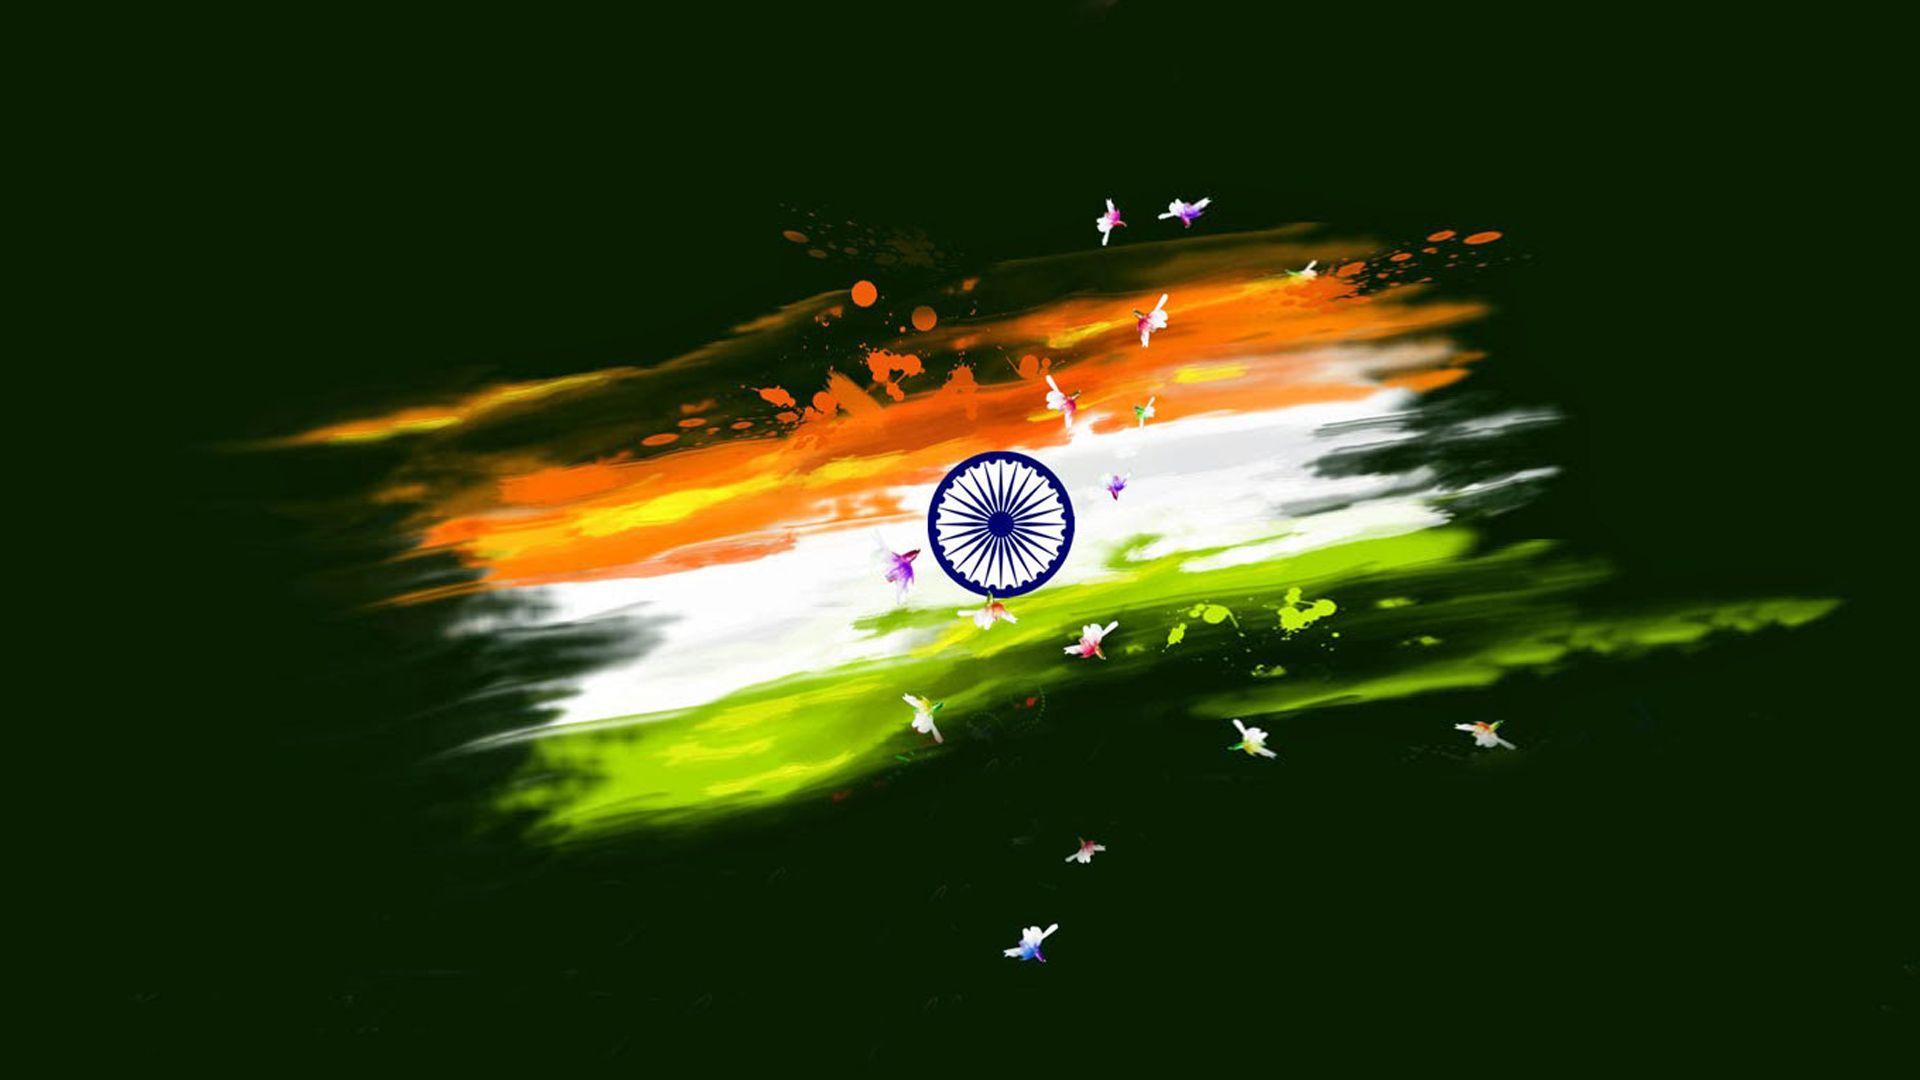 1044 Indian Flag Background Photos and Premium High Res Pictures  Getty  Images